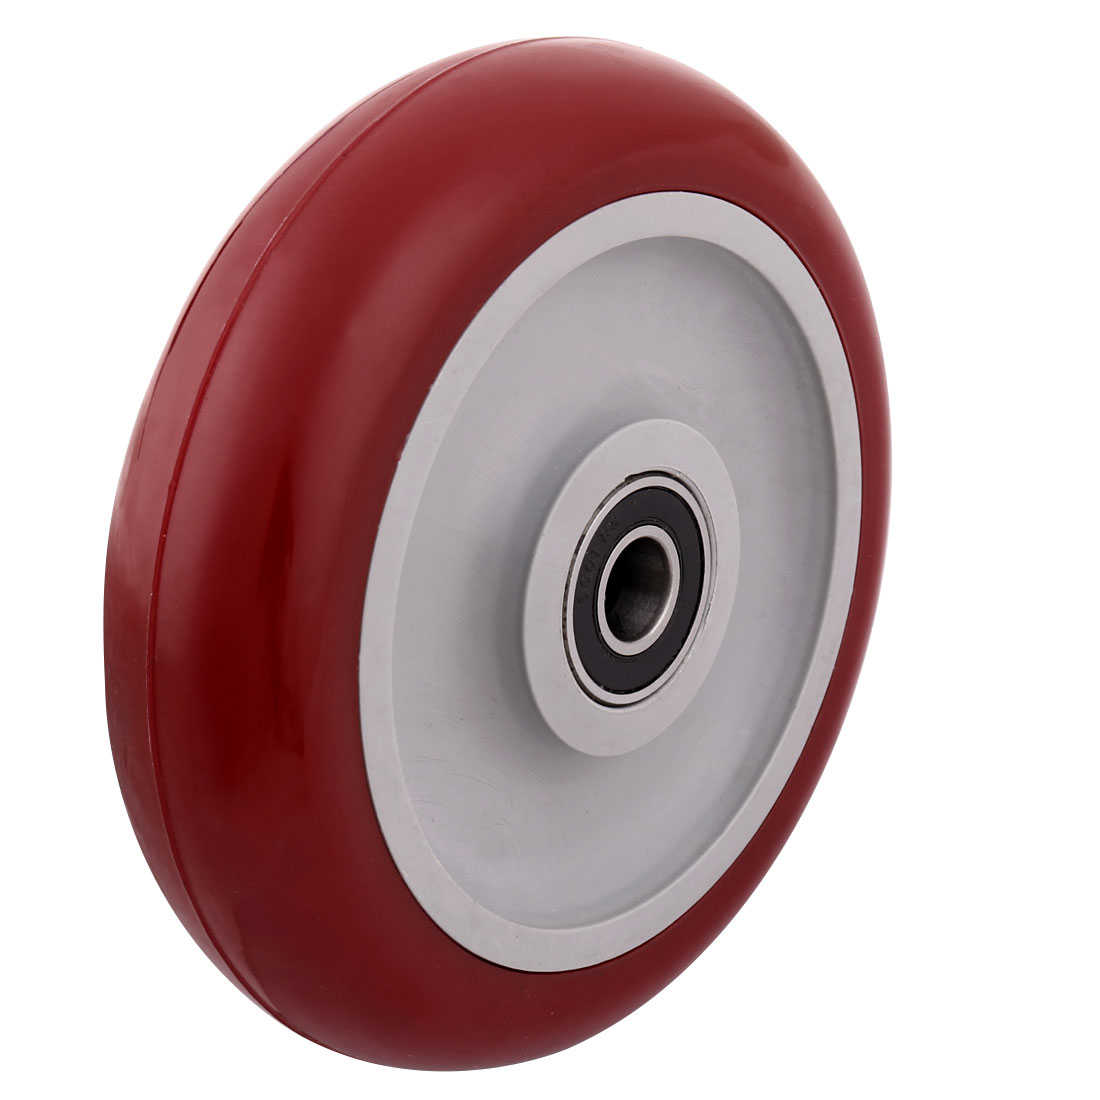 Household Market Shopping Cart Pallet Hand Trolley Replacement Casters Wheel Red